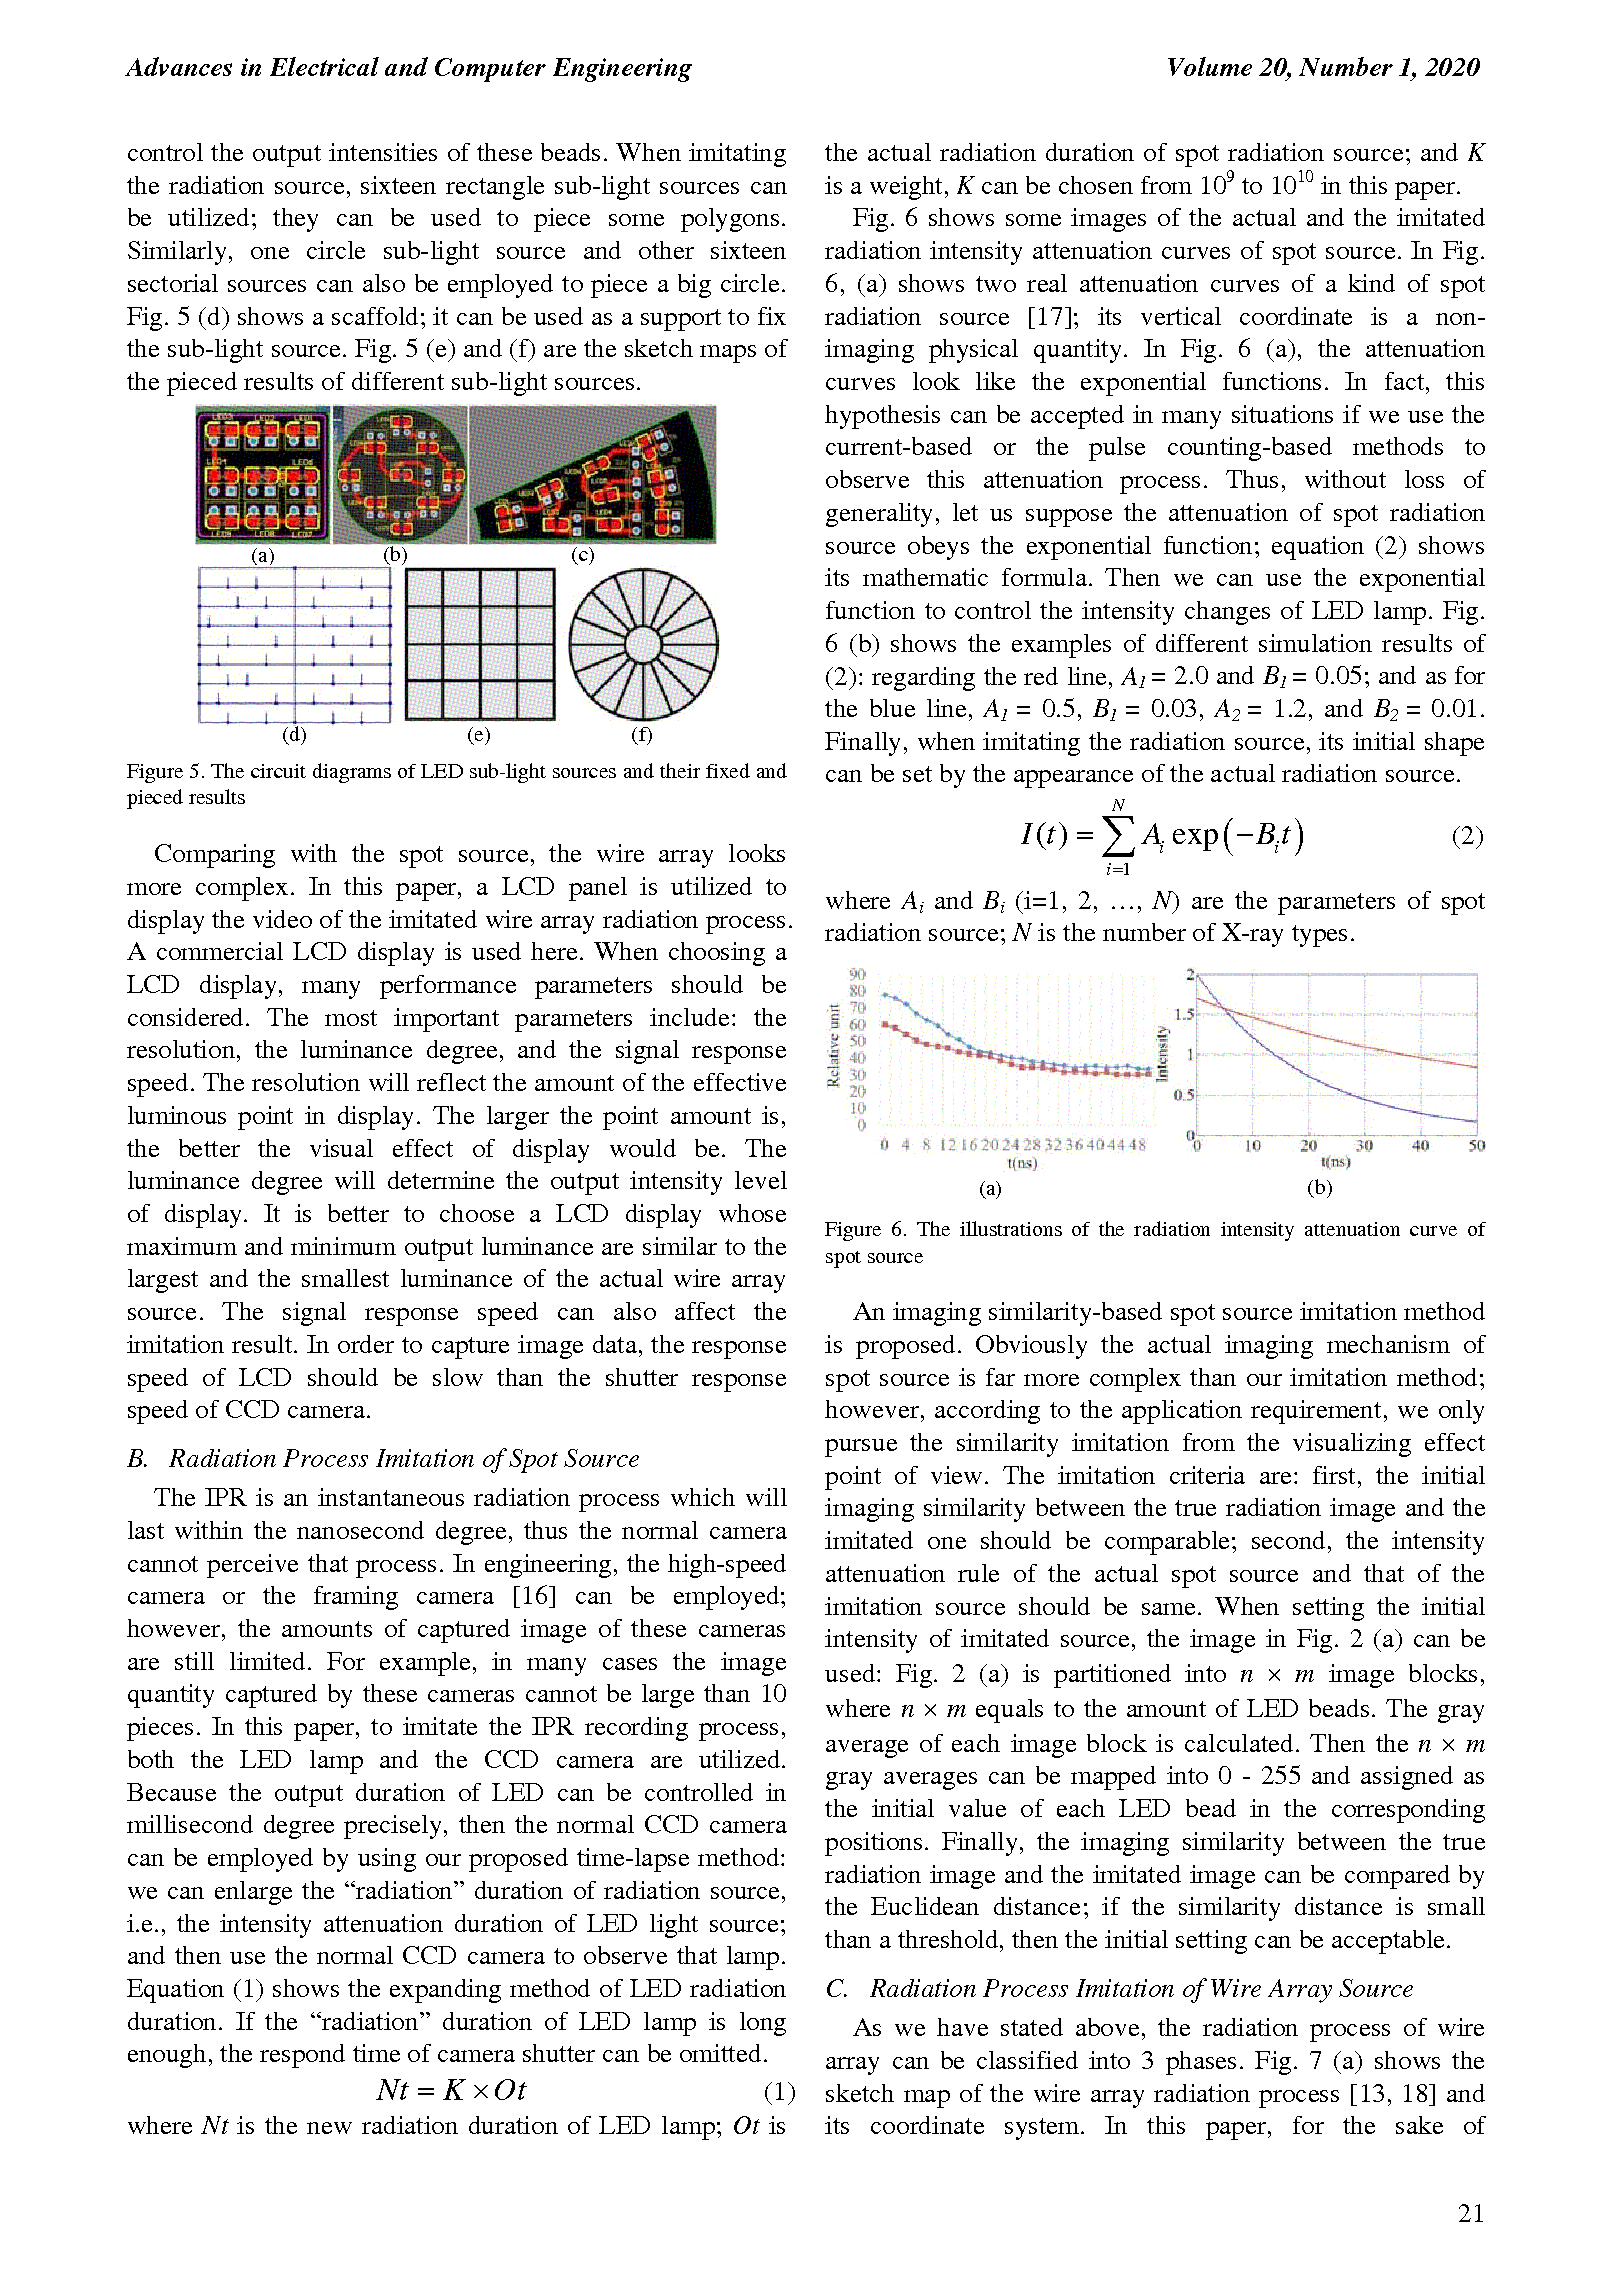 PDF Quickview for paper with DOI:10.4316/AECE.2020.01003